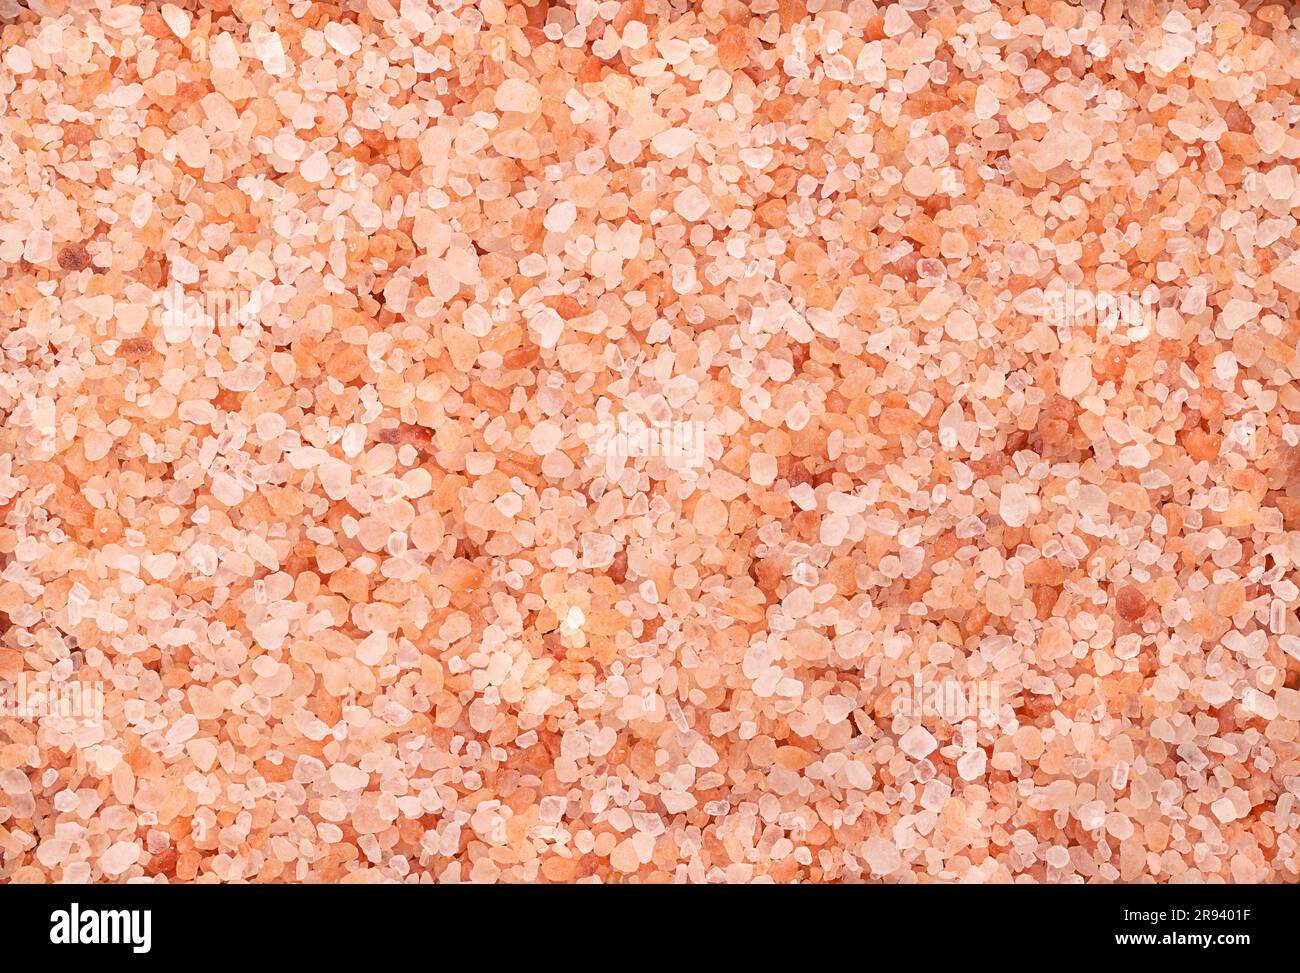 Himalayan salt, coarse crystals, from above. Rock salt, halite, with a pinkish tint, due to trace minerals, mined from the Punjab region. Stock Photo